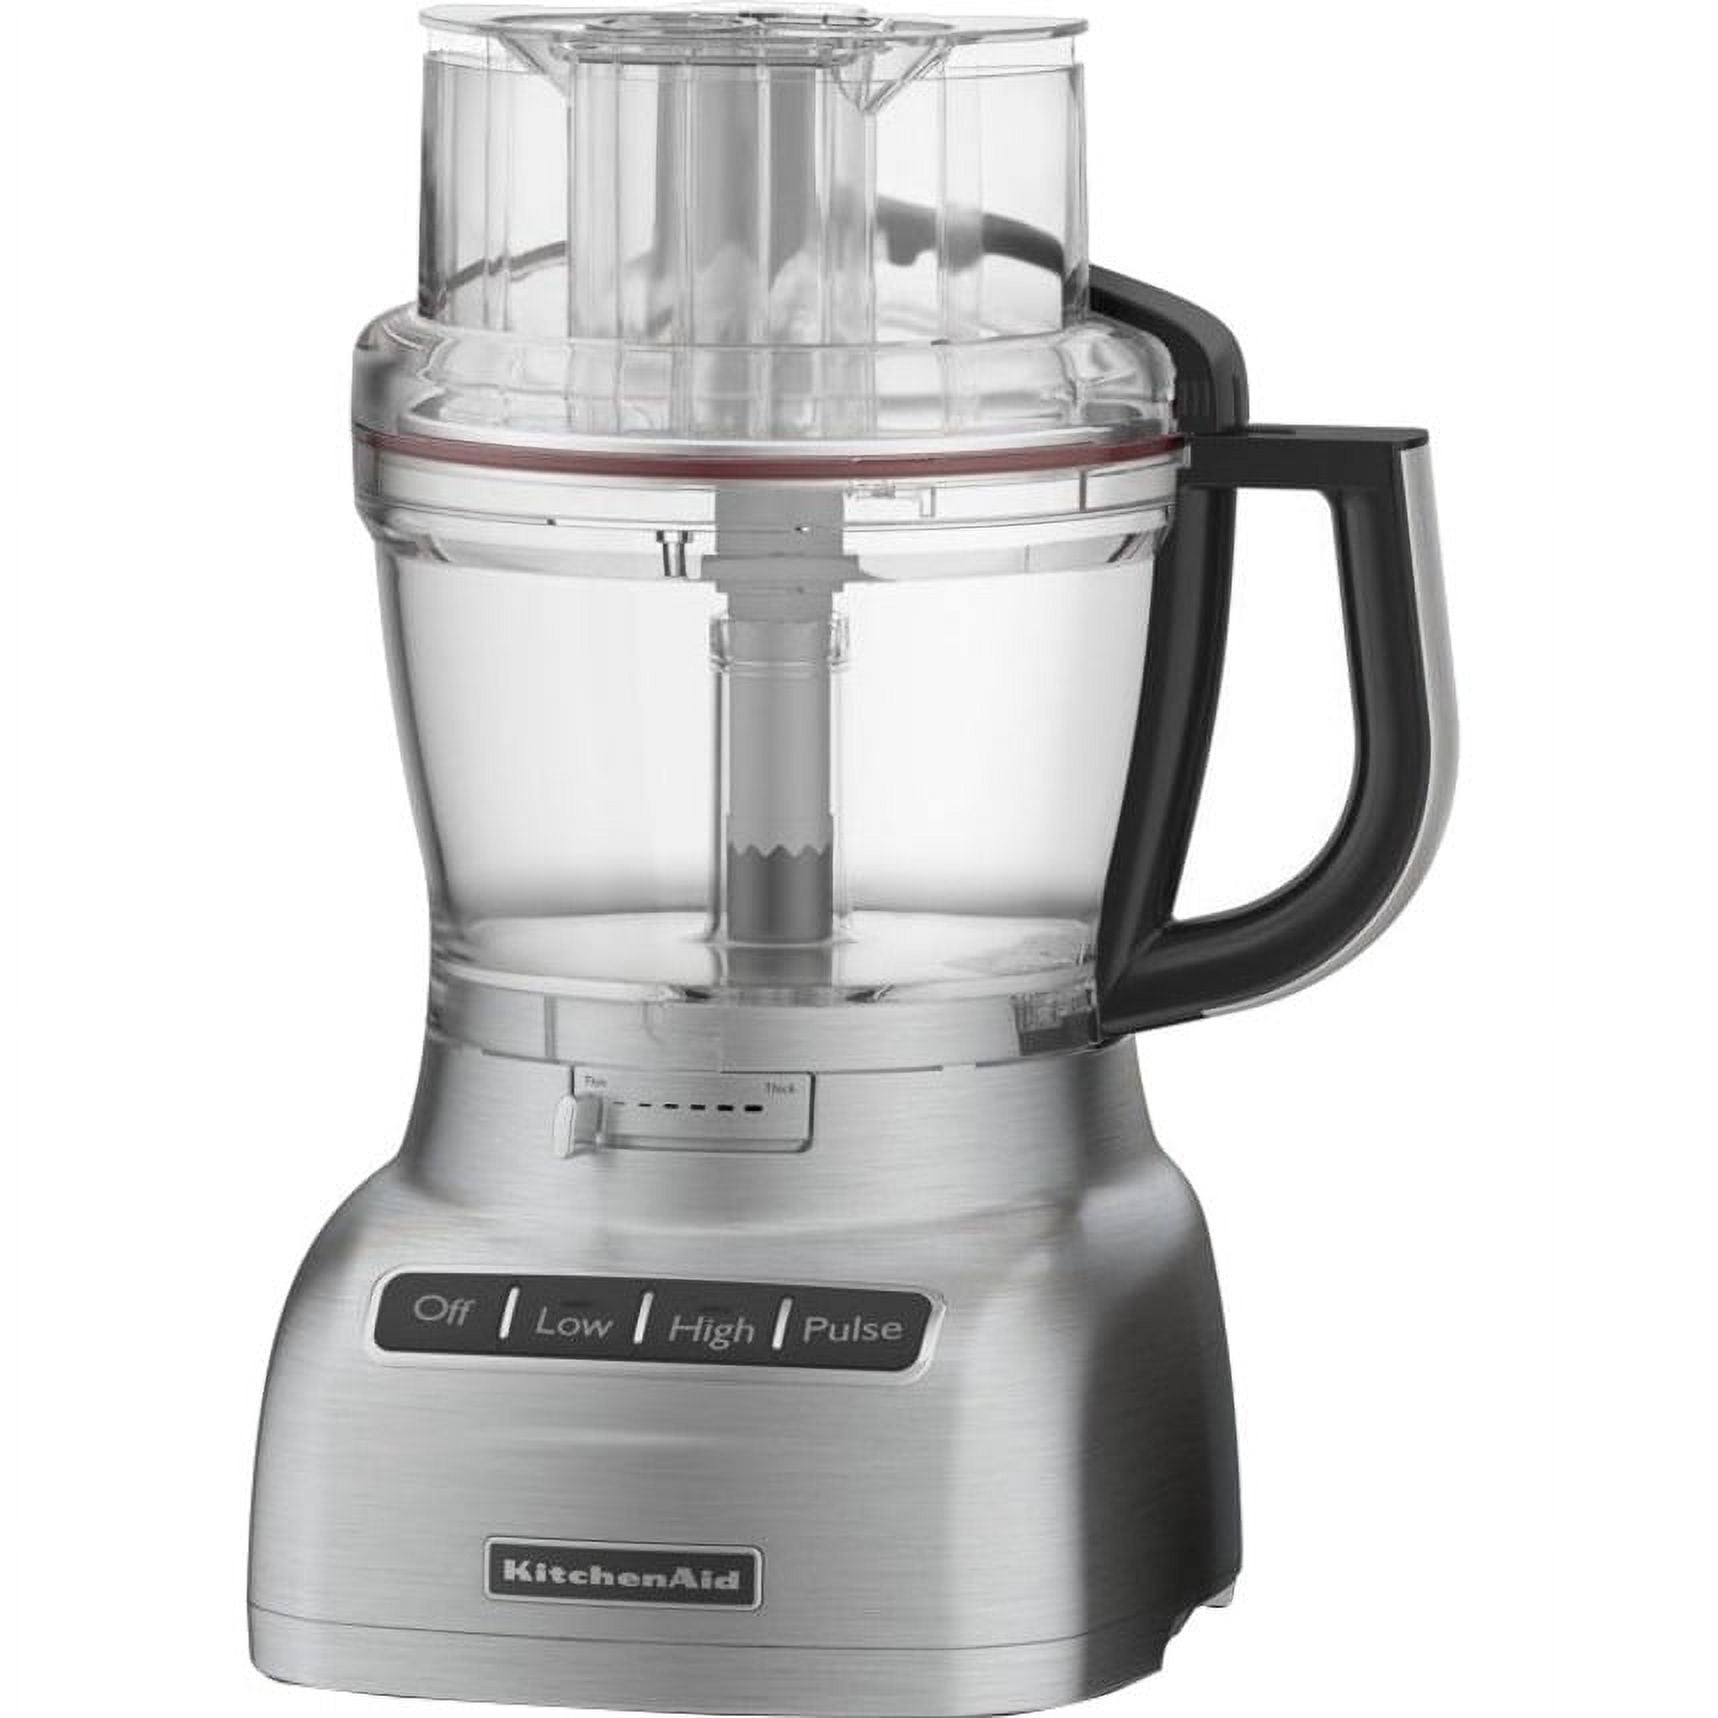  KitchenAid KFP1133CU 11-Cup Food Processor with ExactSlice  System - Contour Silver: Home & Kitchen